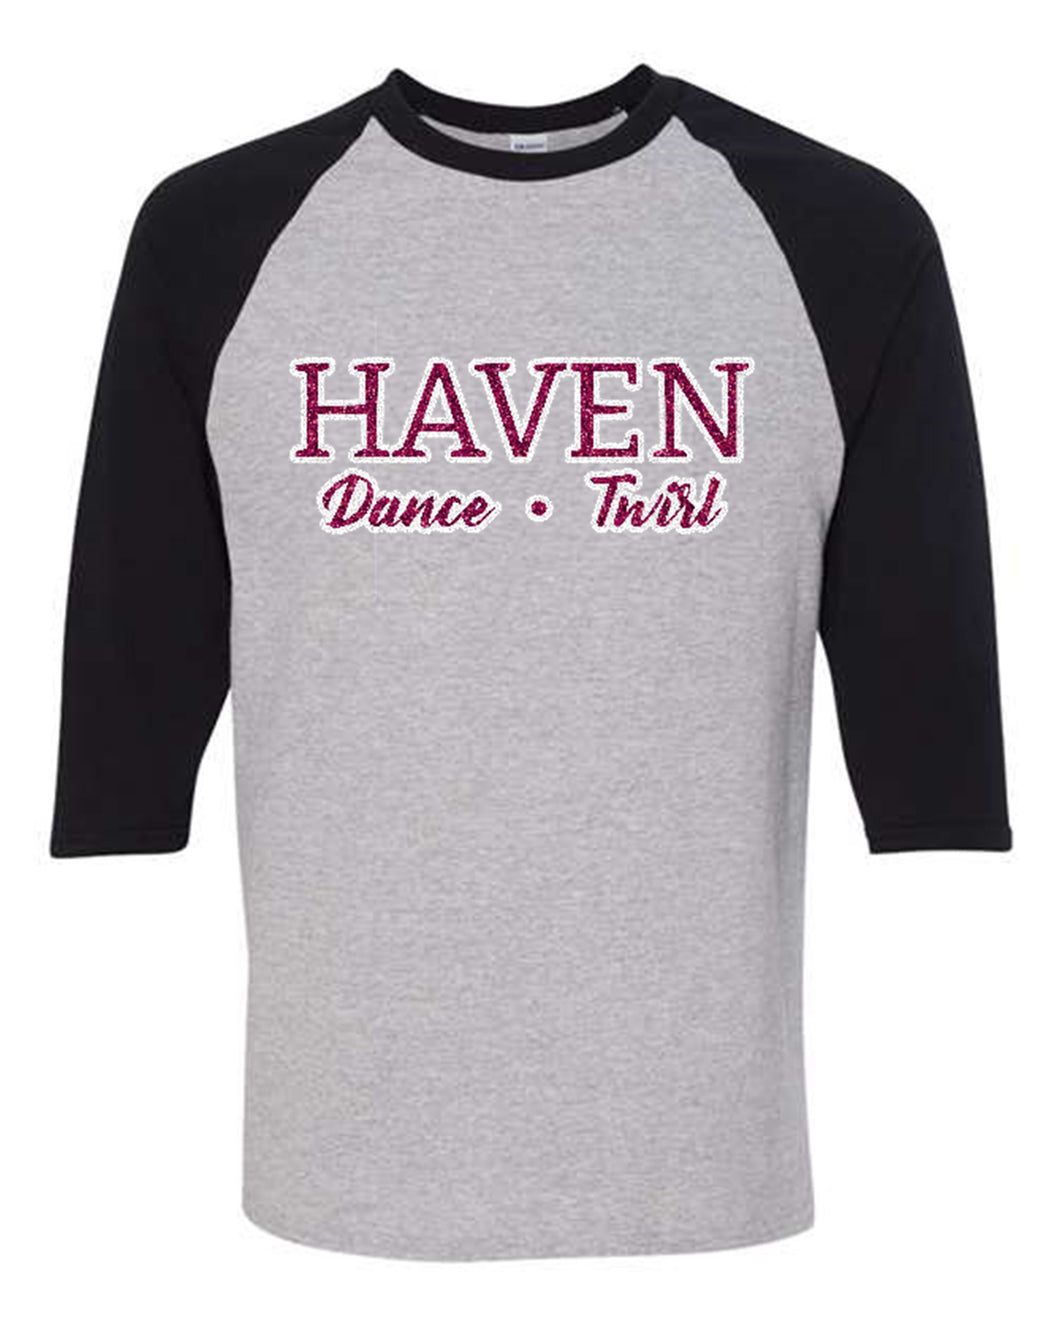 Haven Dance and Twirl Raglan (Adult Sizes Only)